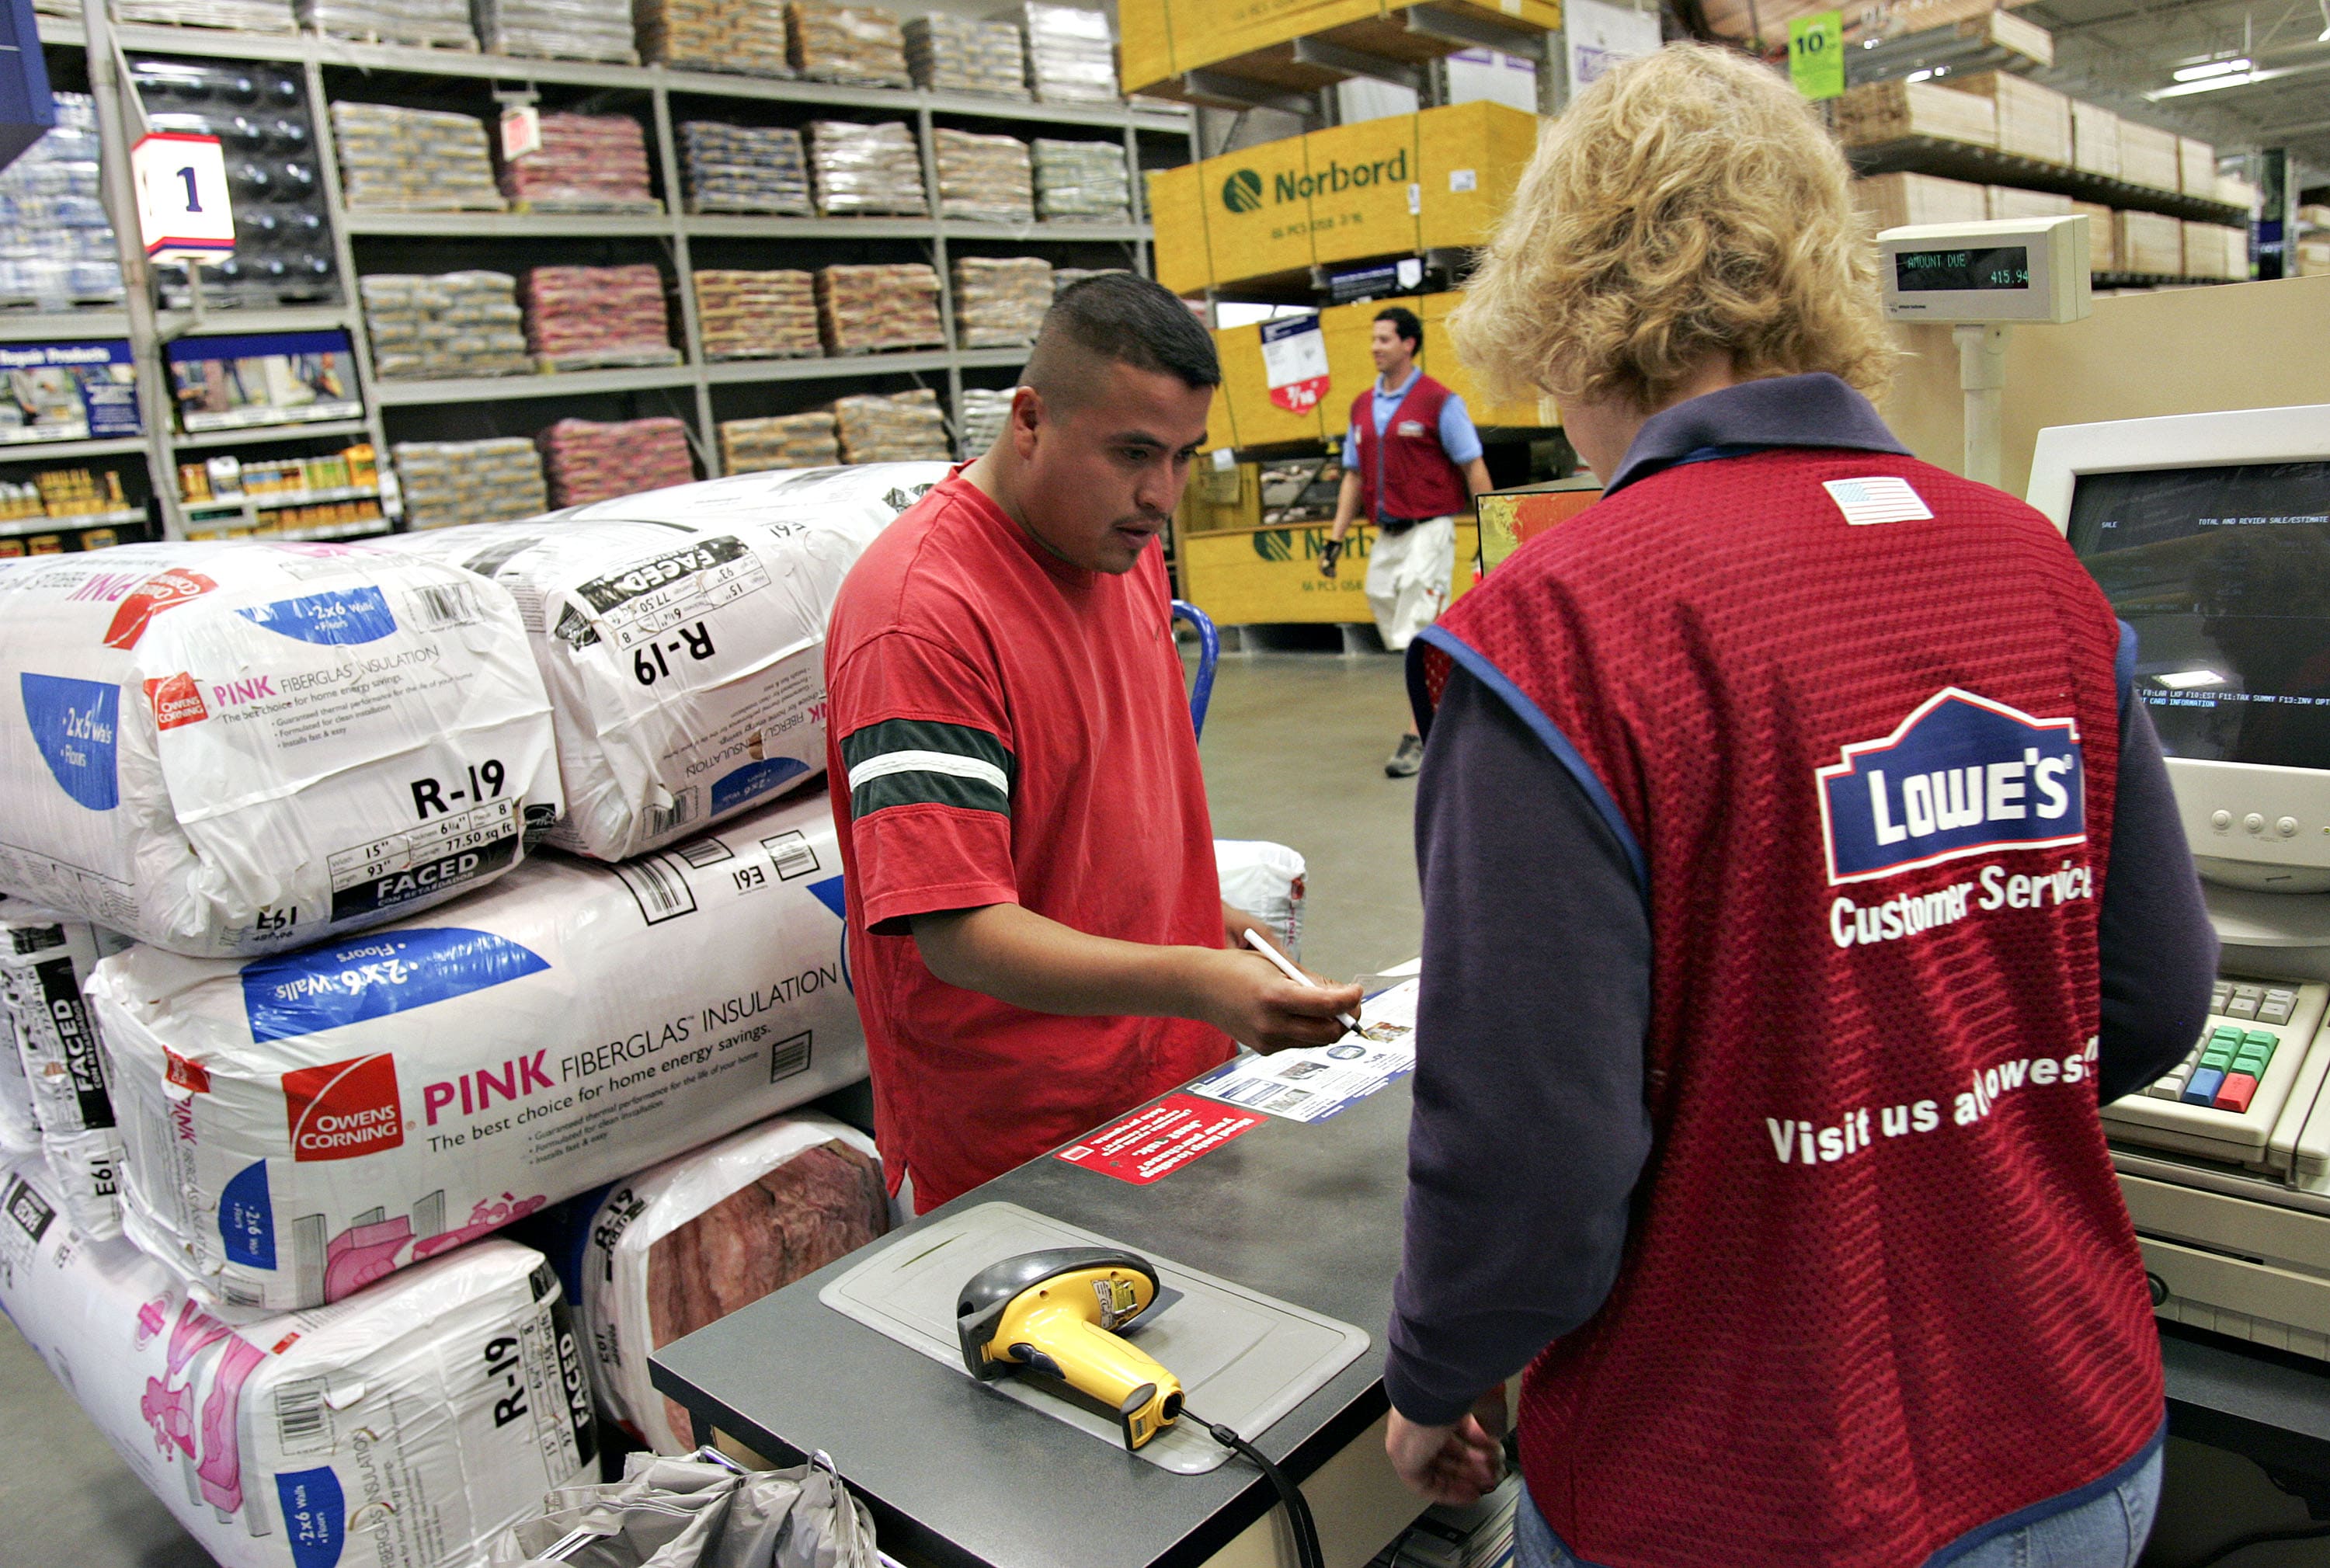 Lowe's credits this new strategy in beating Home Depot on sales growth